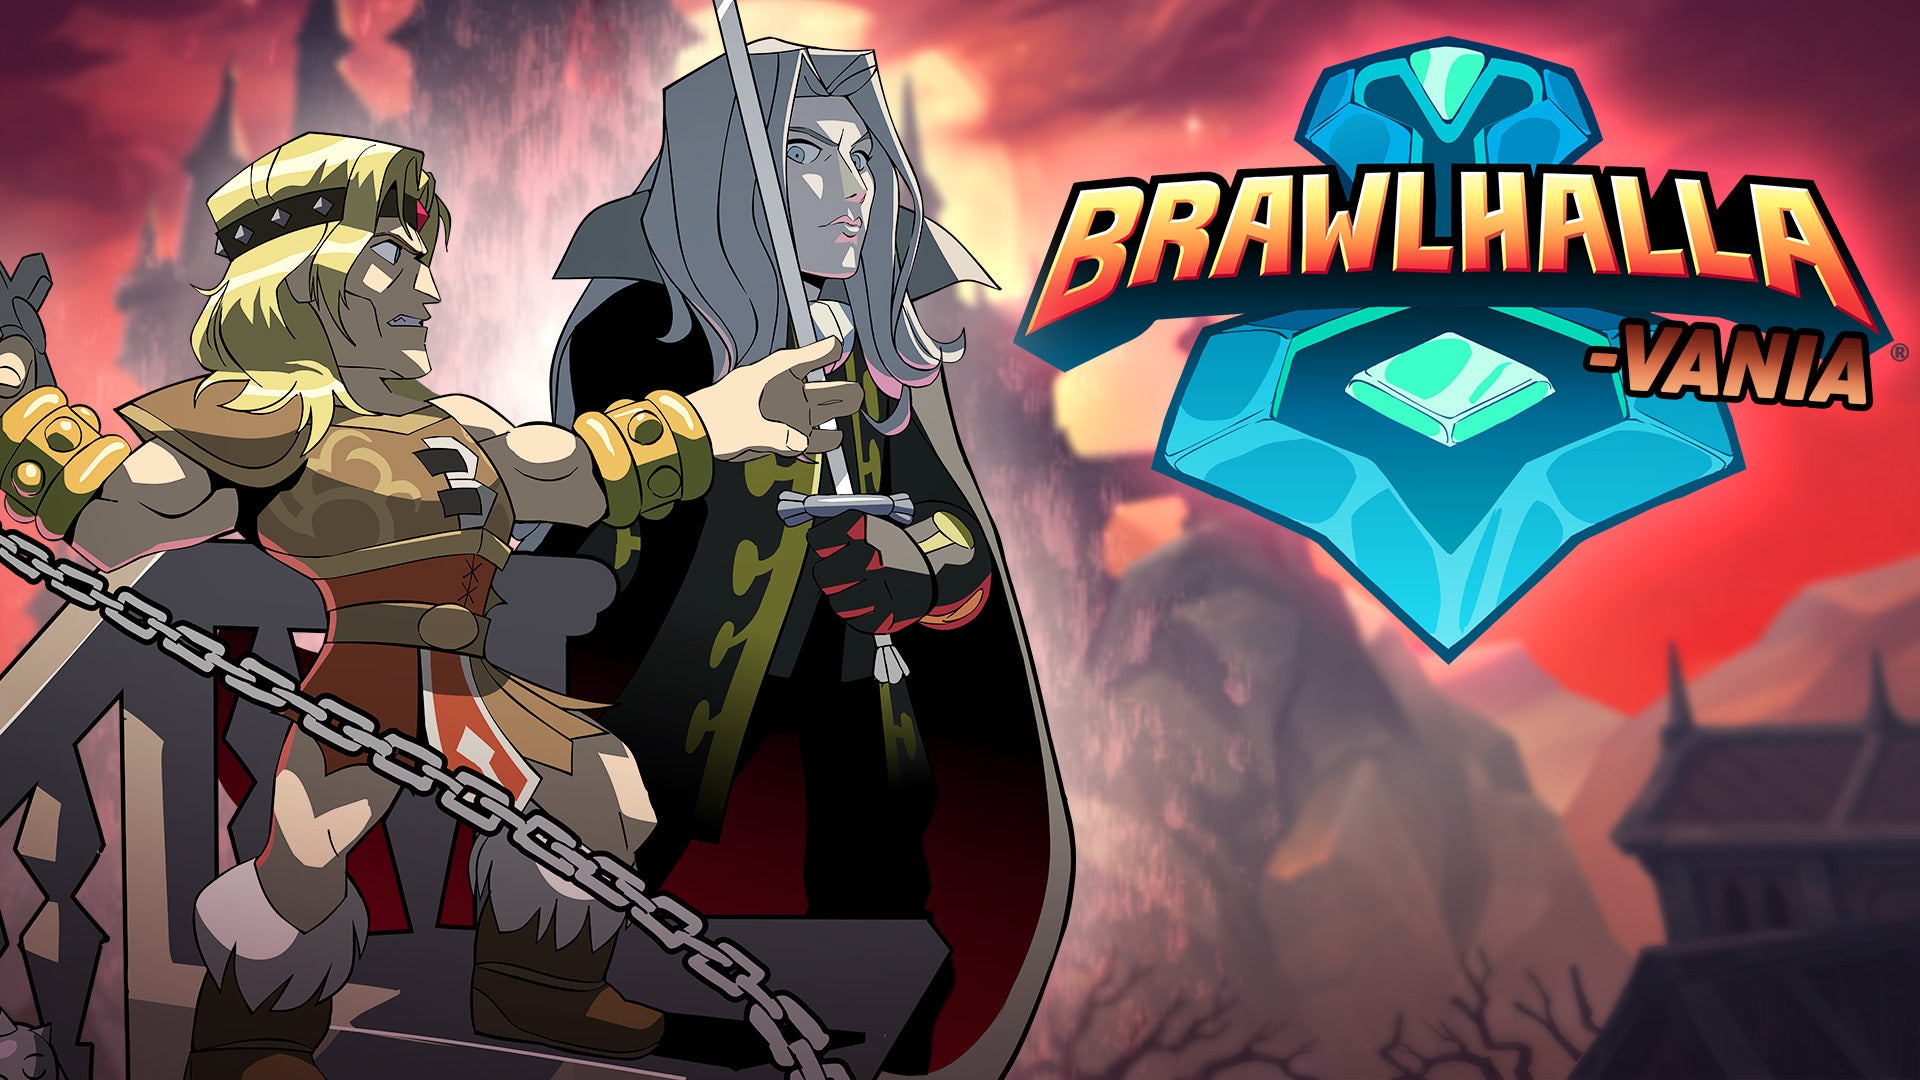 Image for Simon Belmont and Alucard are paying a visit to Brawlhalla over Halloween